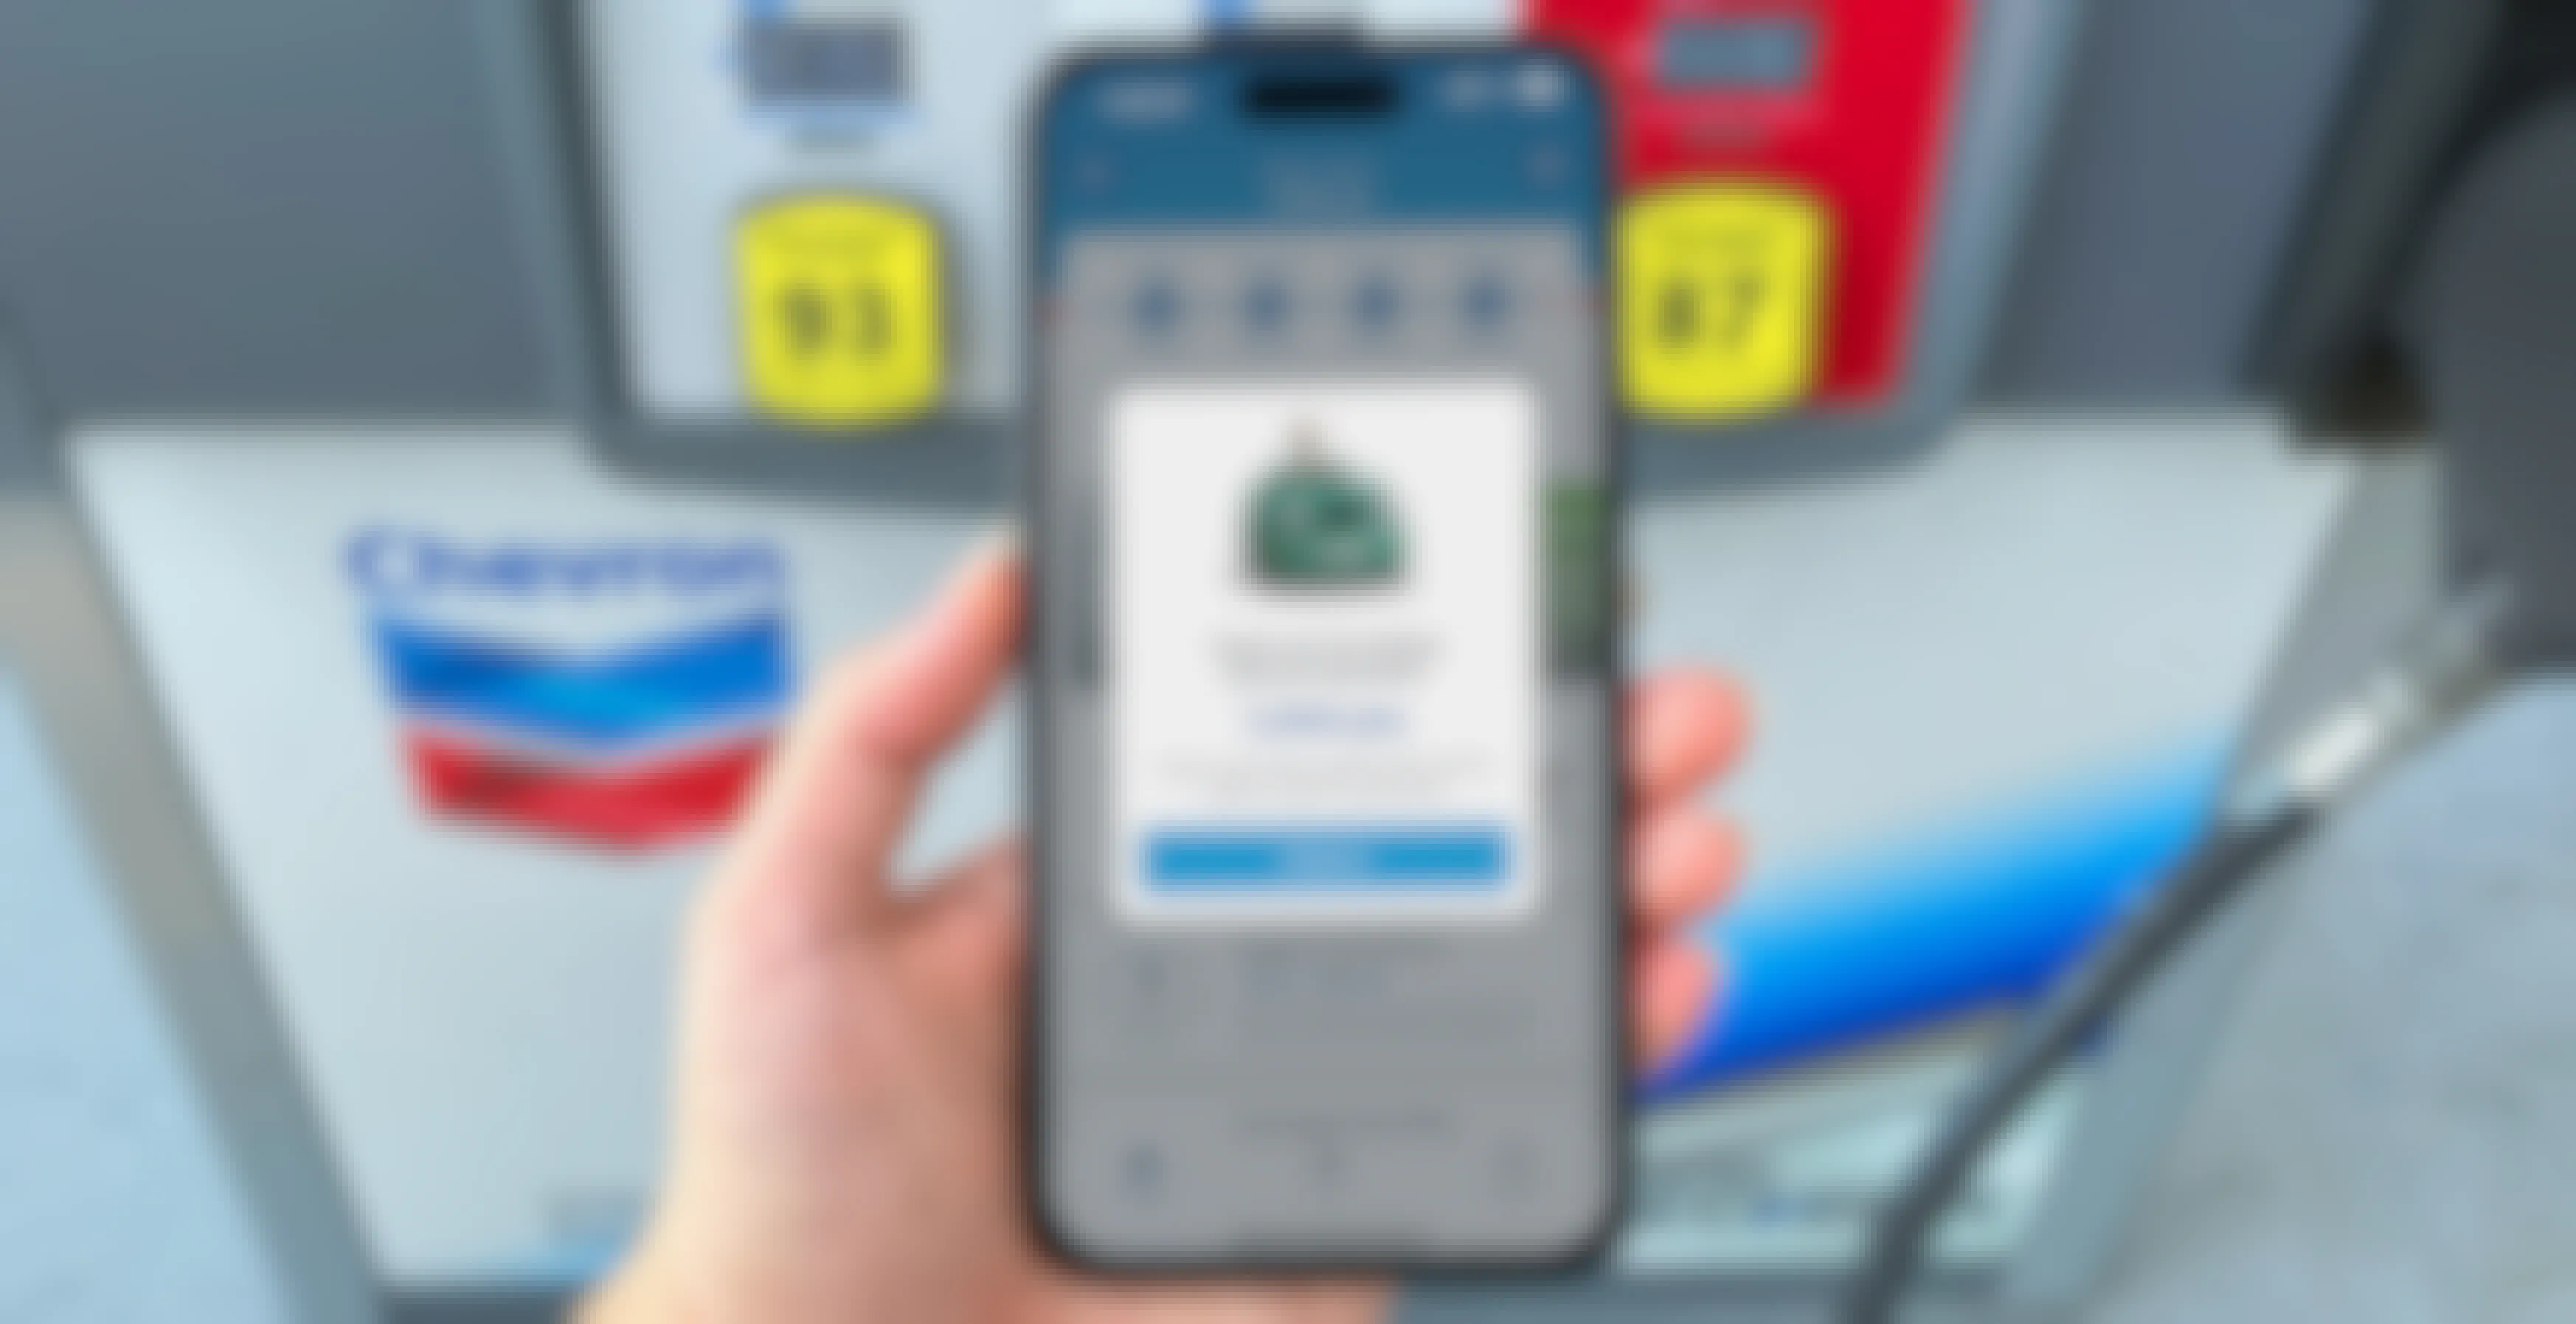 Cheap Gas Prices: Join Chevron Rewards for $1 Off/Gallon on Your First 3 Visits